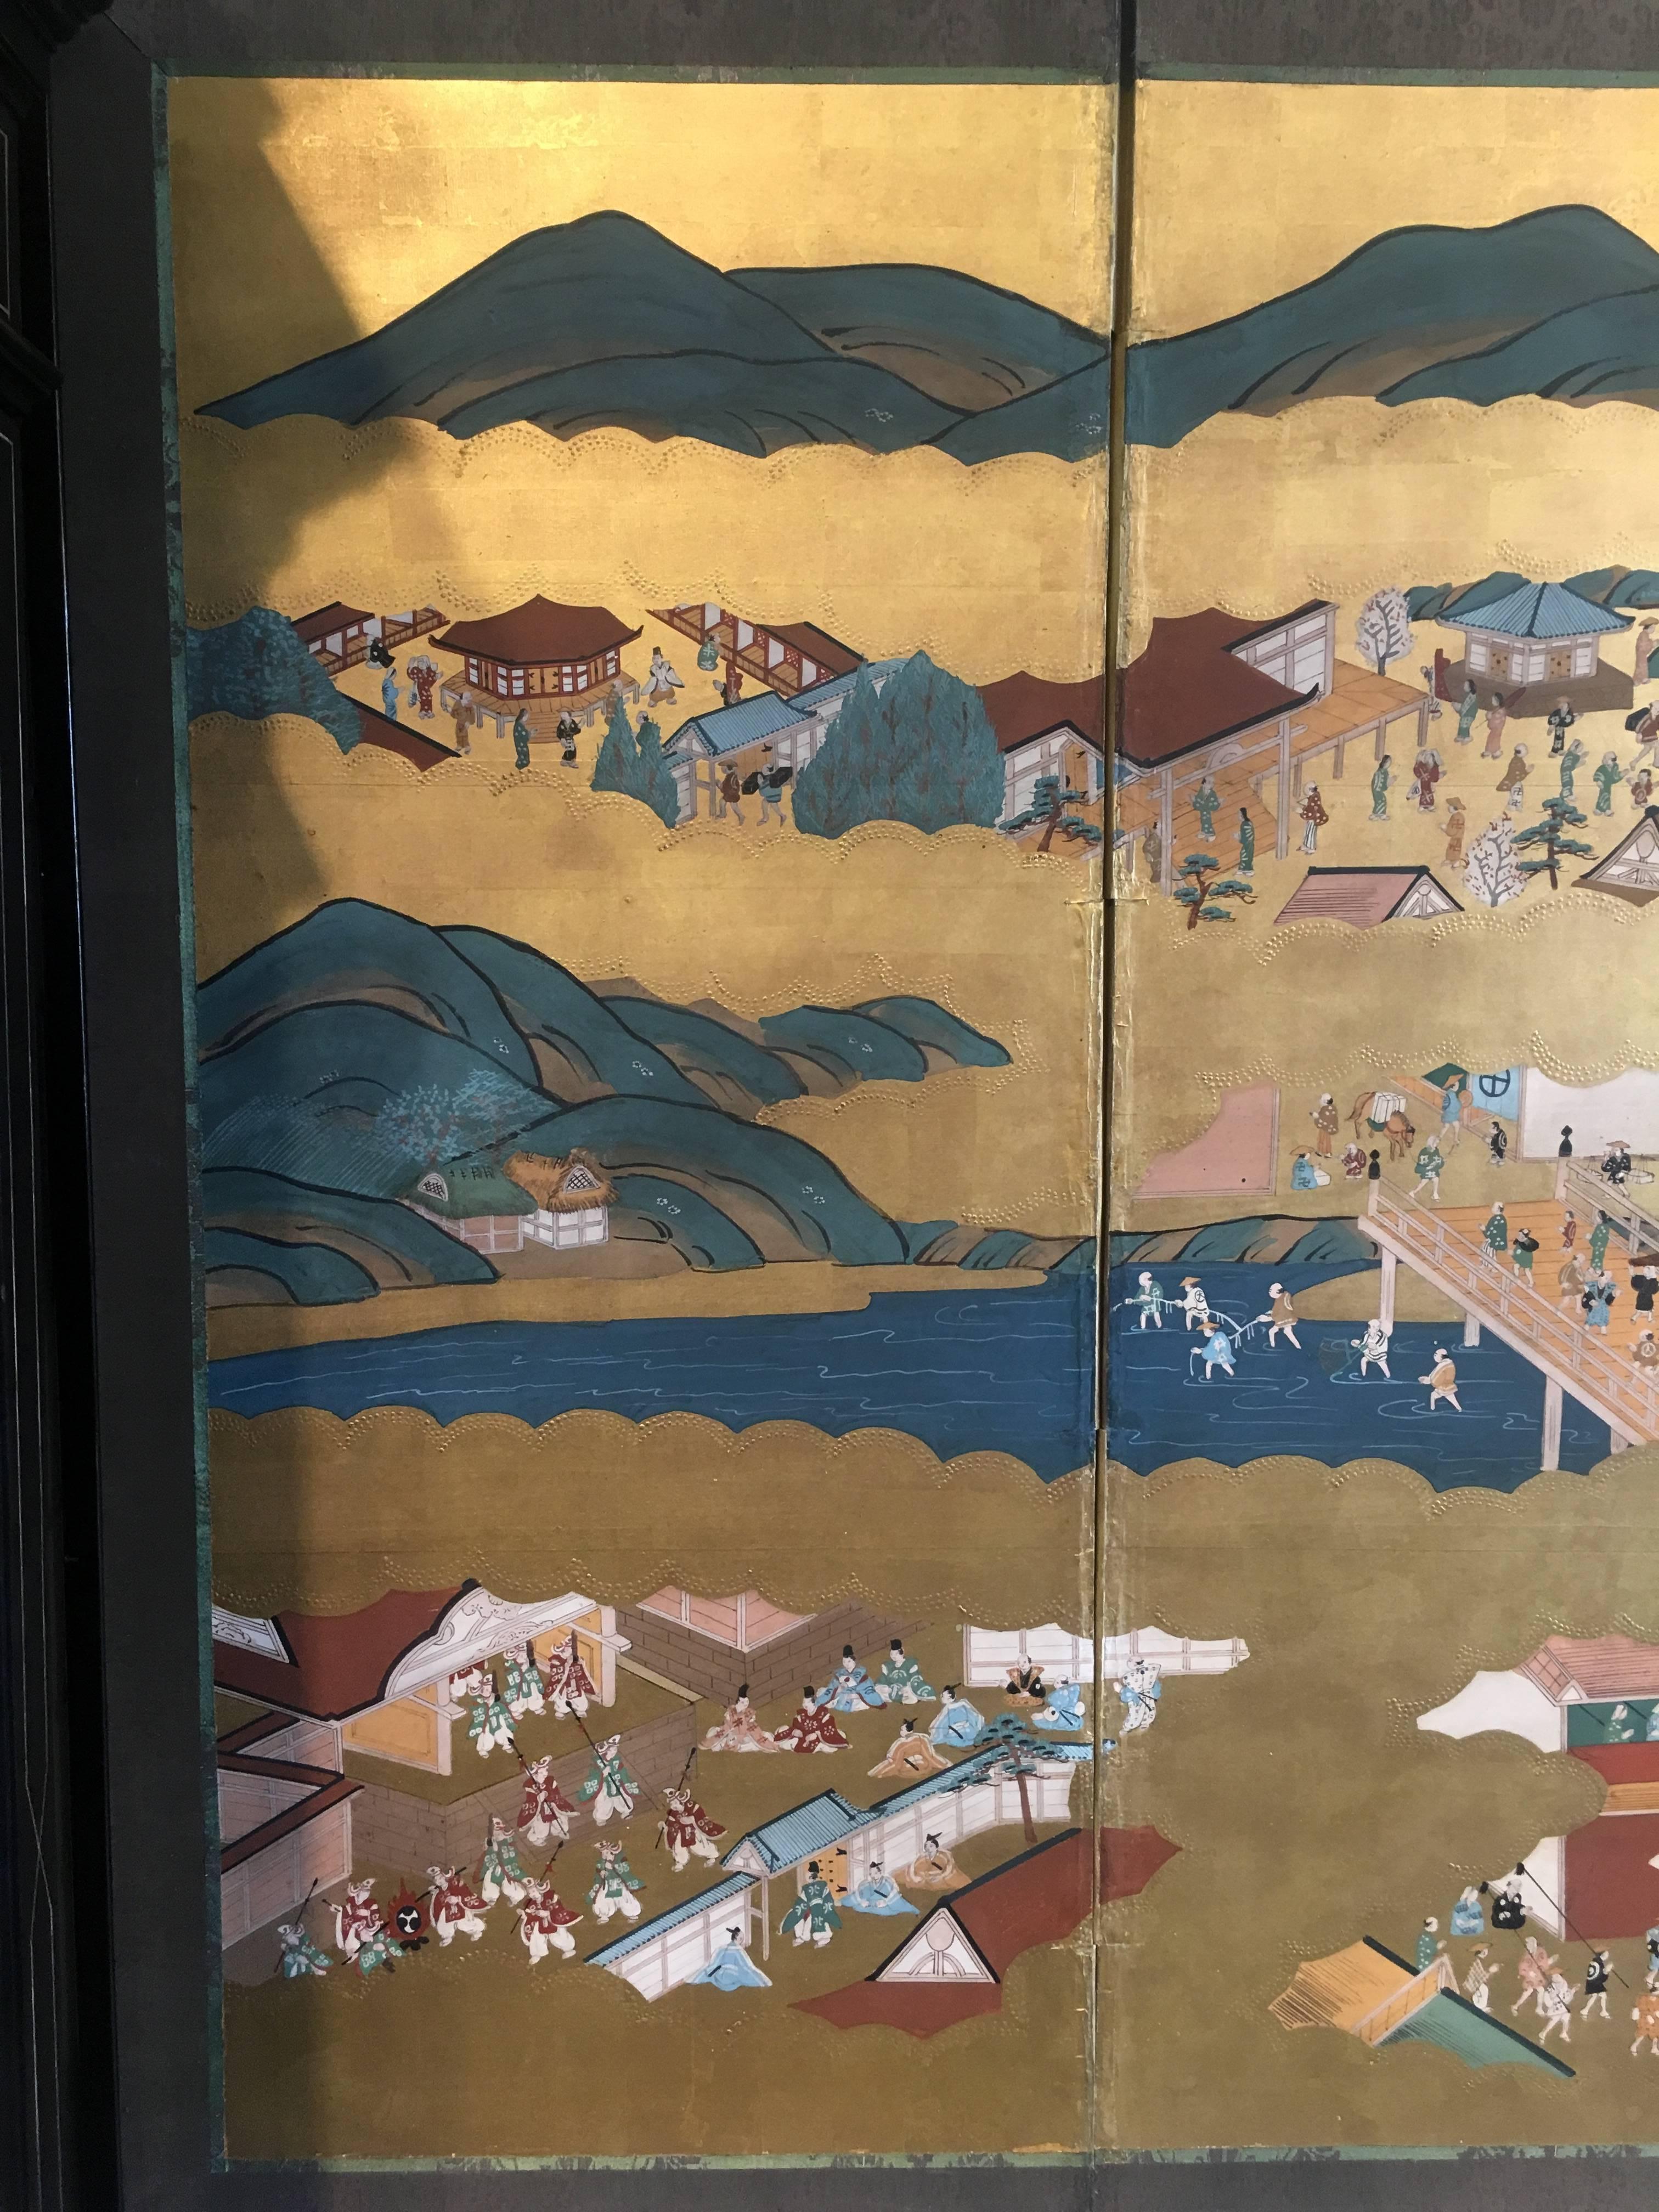 A fine Japanese Tosa School six fold painted paper screen, byobu.
Painted in bright mineral pigments, with large areas covered by a stunning gold leaf, evoking clouds kissed by the sun.
The scene depicted is of the Gion Matsuri, a yearly festival